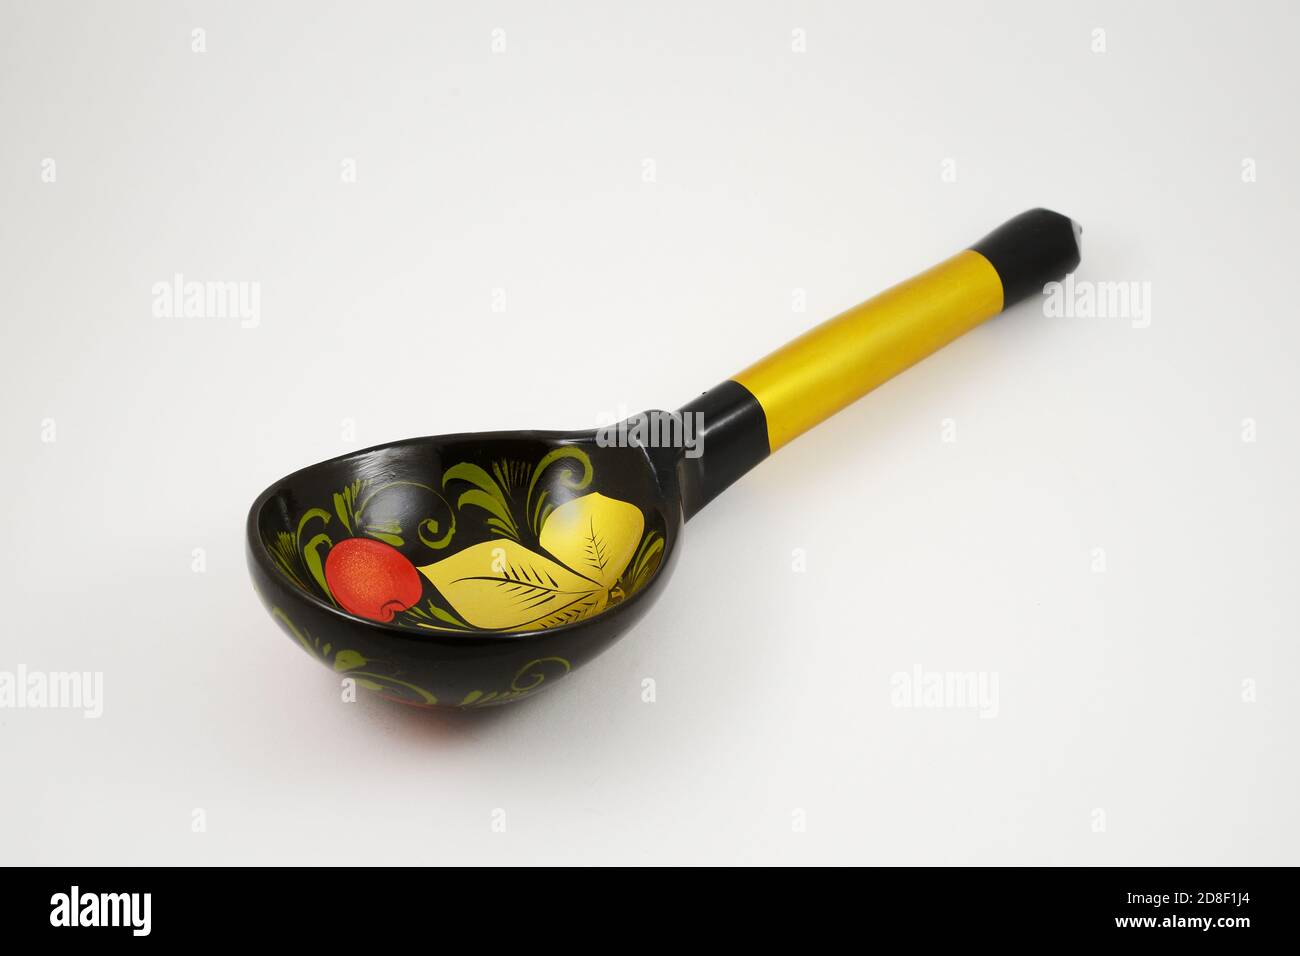 traditional painted wooden spoon from Russia on a white background Stock Photo